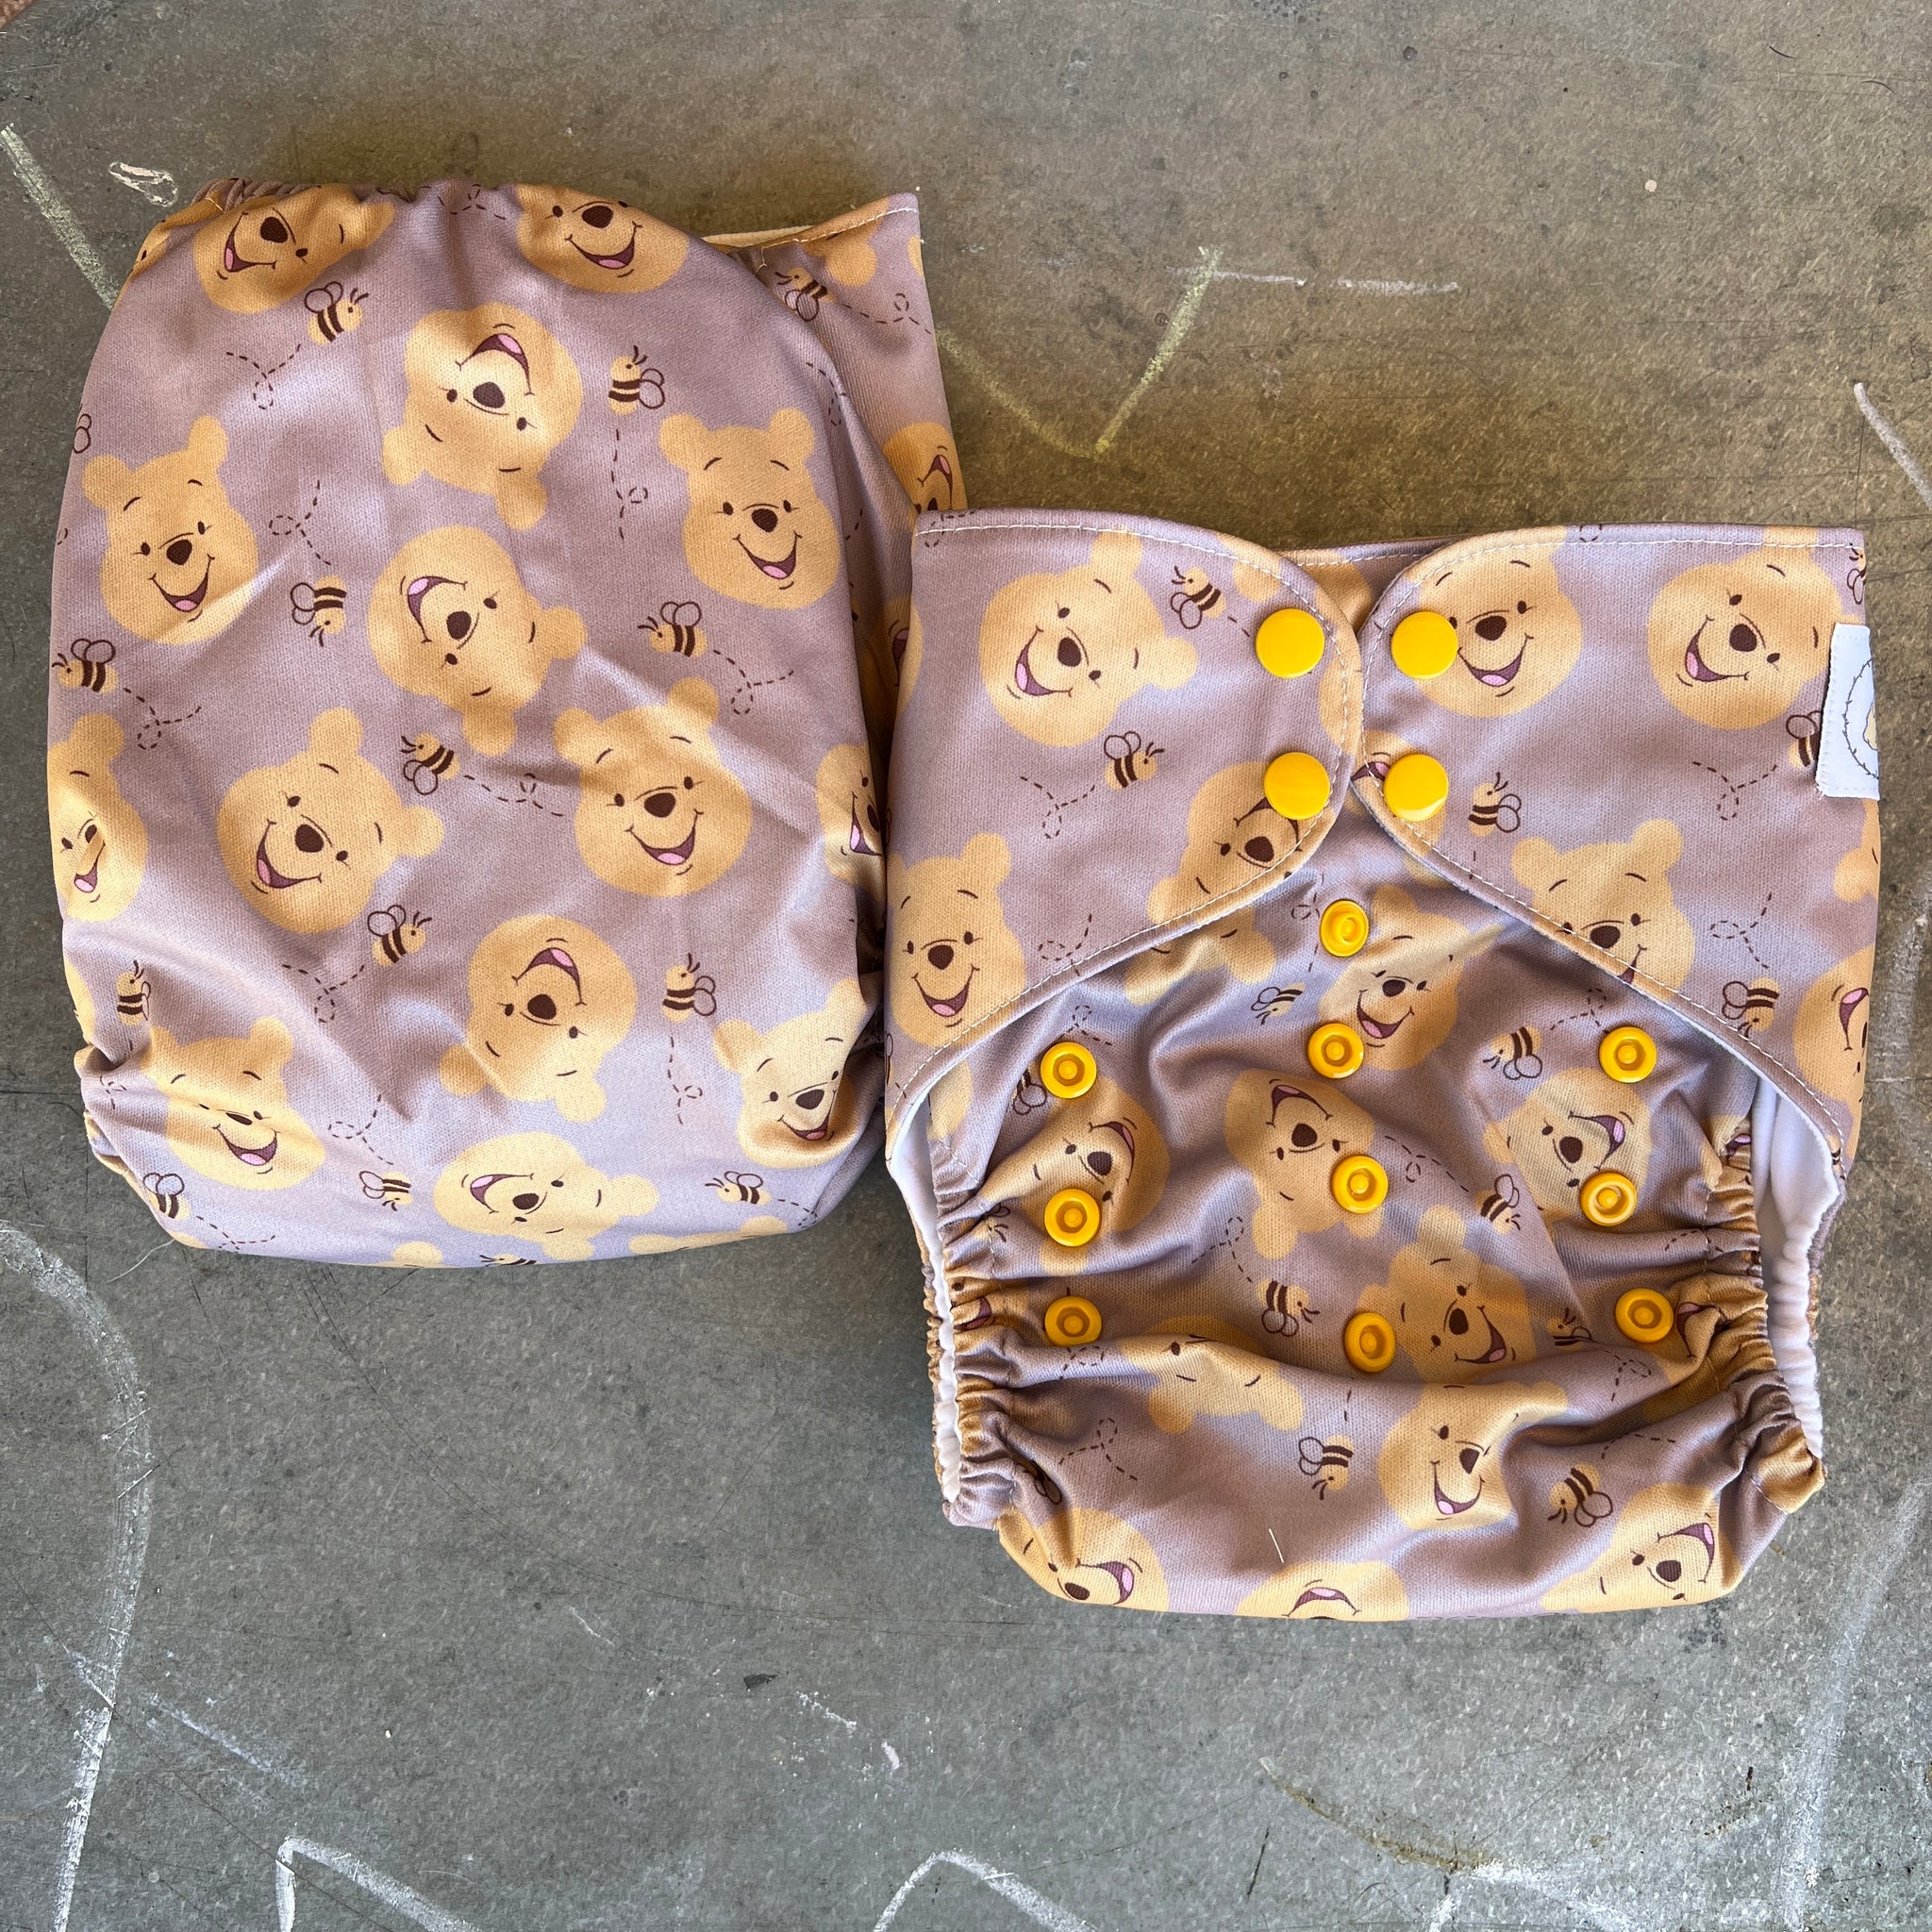 Little Bunny Tails - The BIGGER Bunny - Larger One Size Pocket Diaper